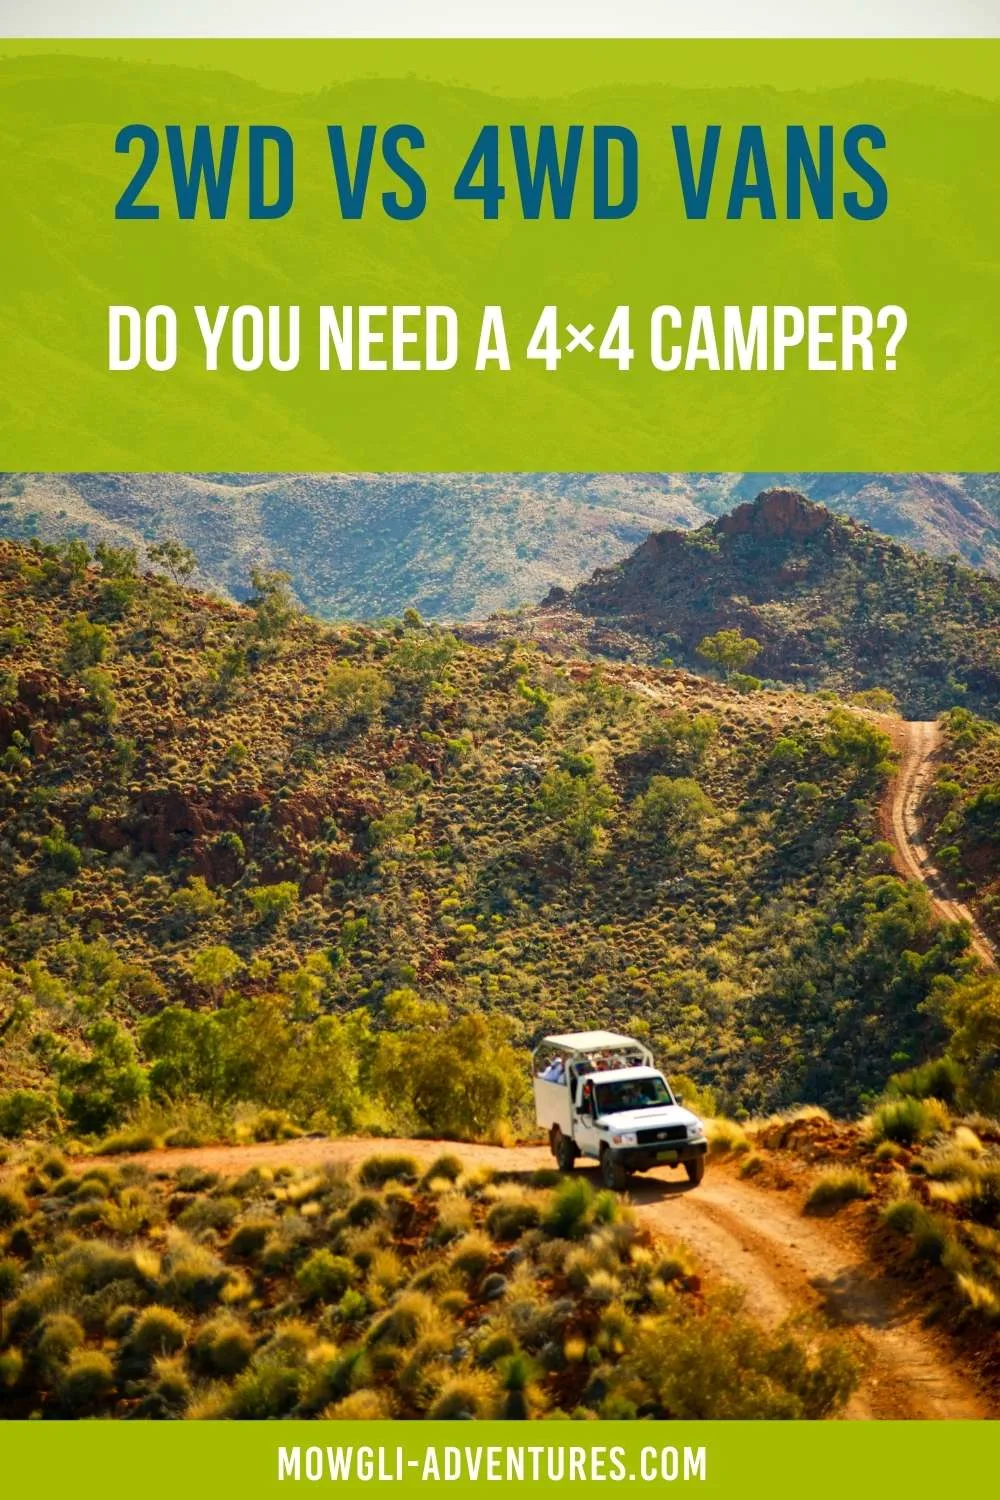 2wd vs 4wd - Do you need a 4x4 camper